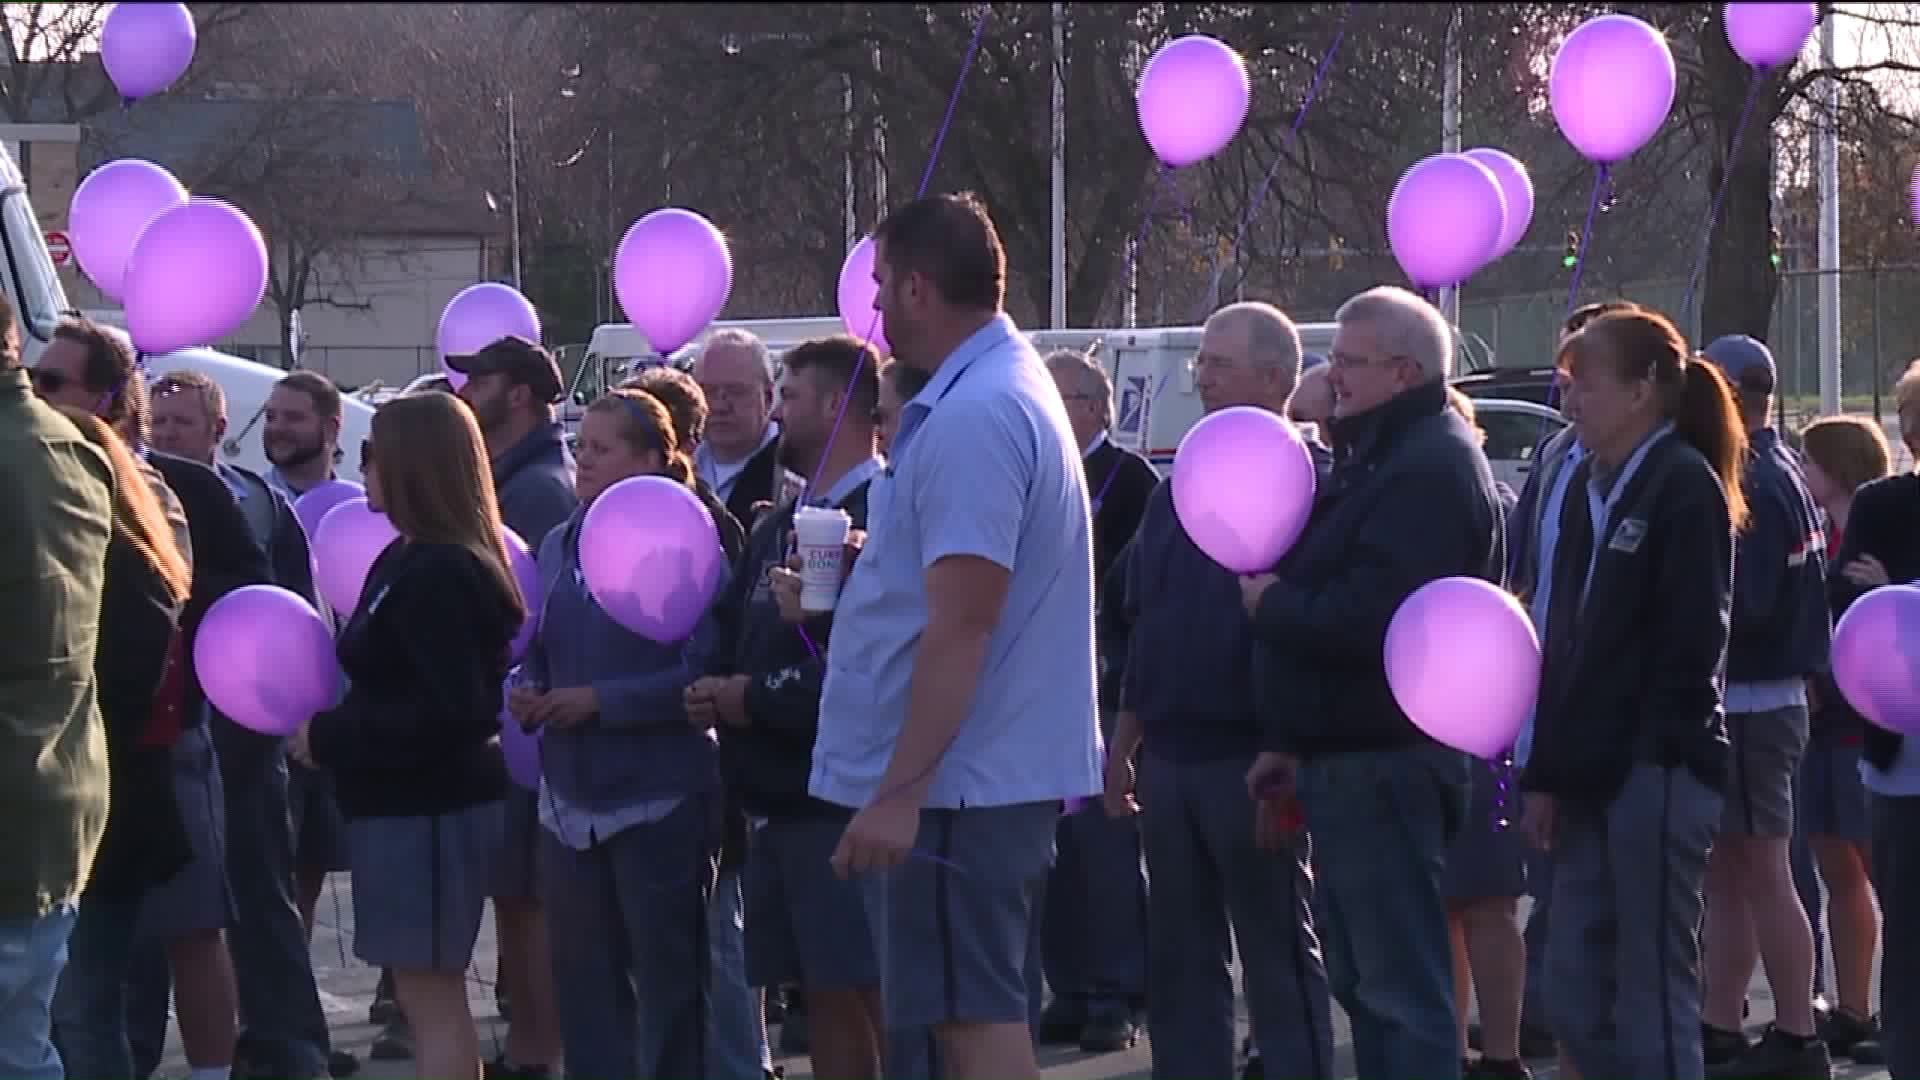 Balloons Released in Memory of Mail Carrier Killed in Arson